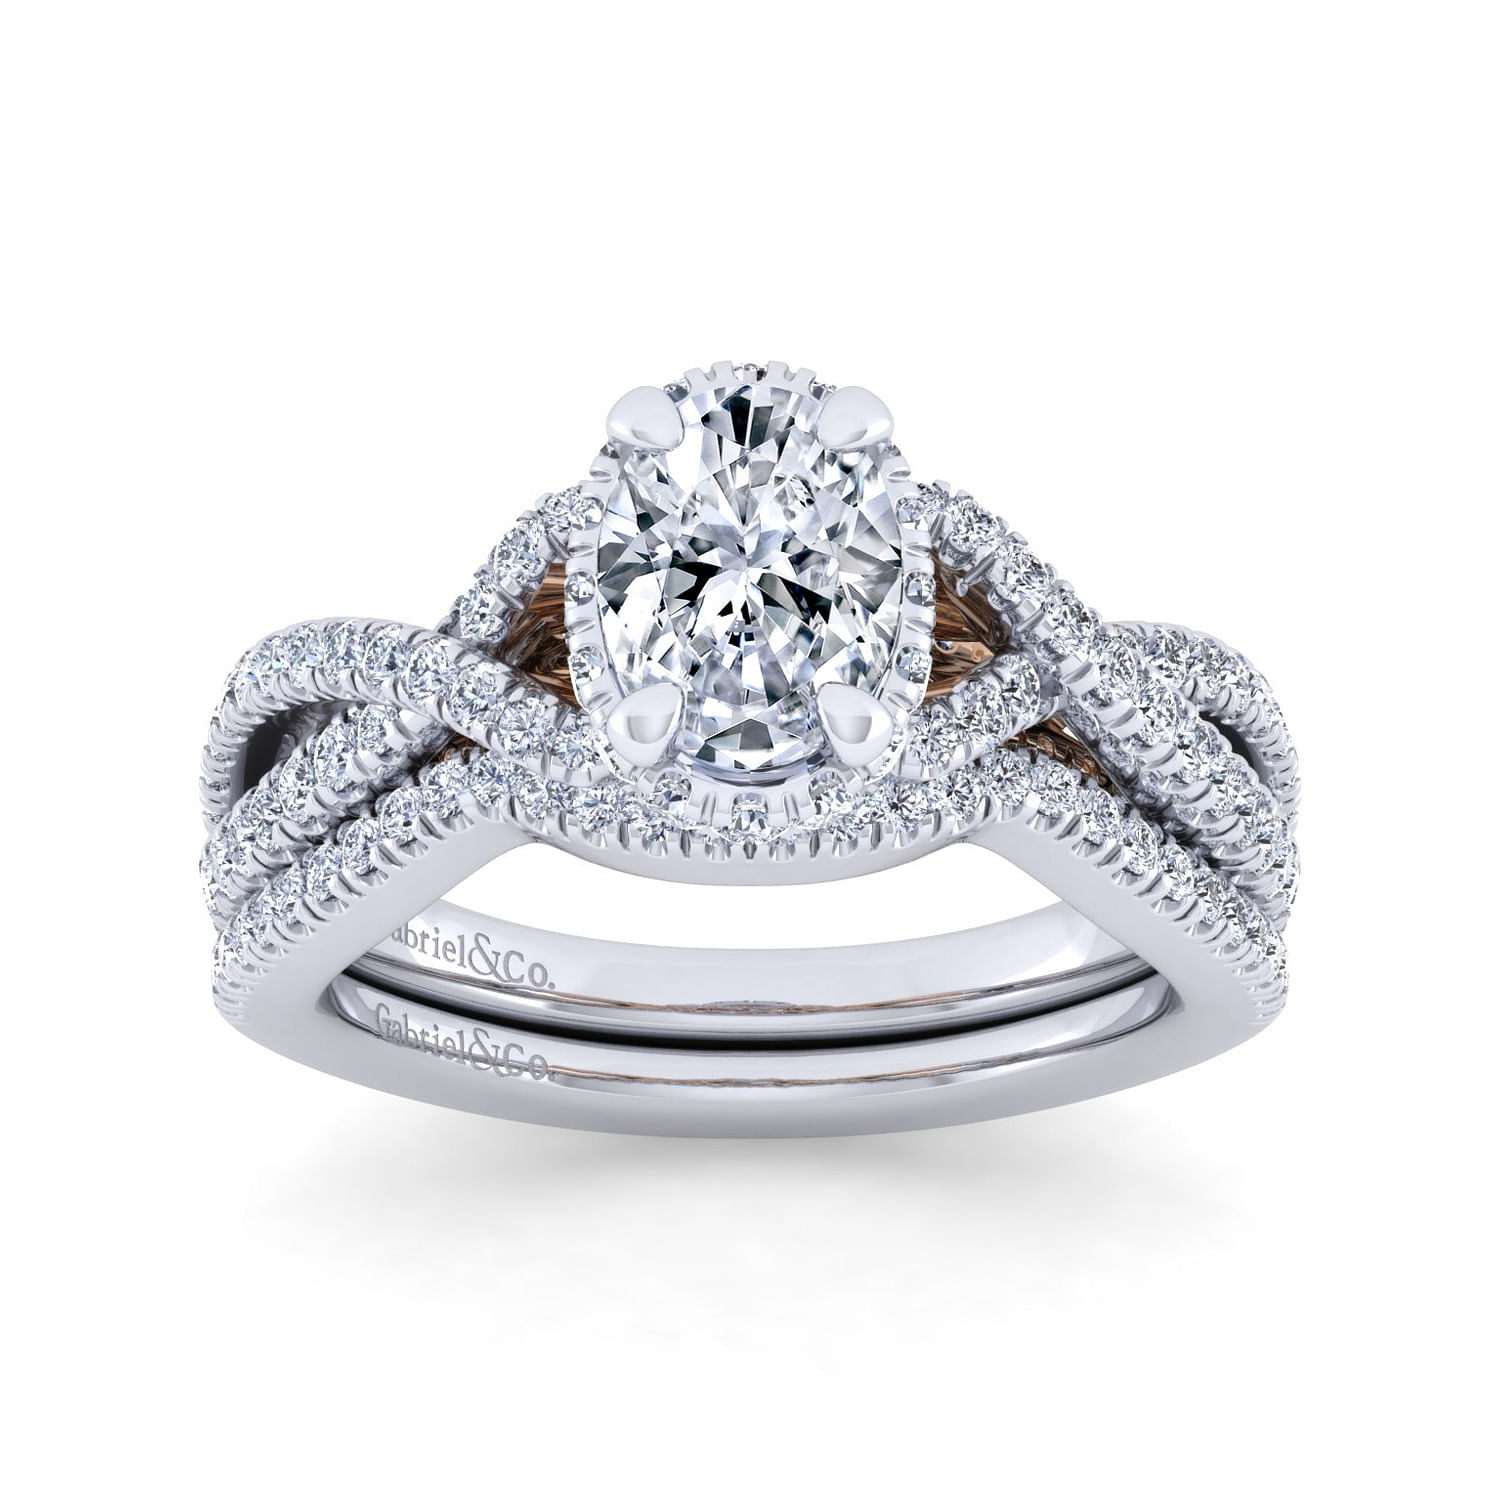 14K White-Rose Gold Twisted Oval Diamond Engagement Ring